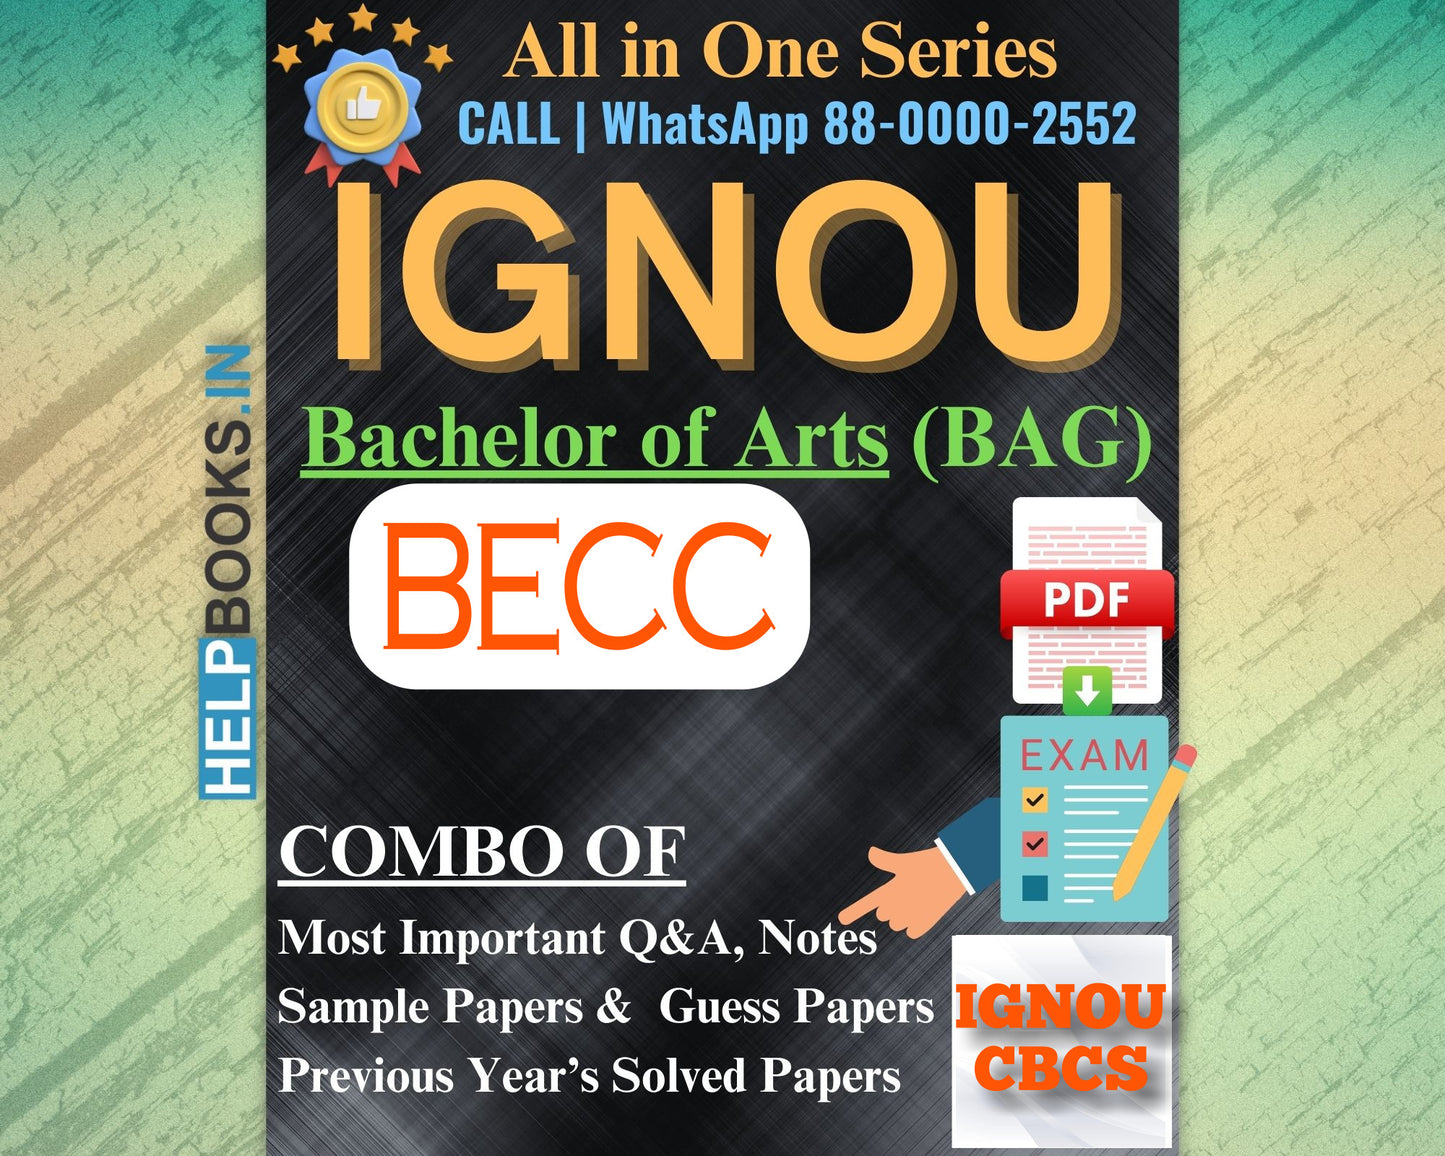 IGNOU BAG Online Study Package: Bachelor of Arts (BA) - Previous Years Solved Papers, Q&A, Exam Notes, Sample Papers, Guess Papers-BECC131, BECC132, BECC133, BECC134